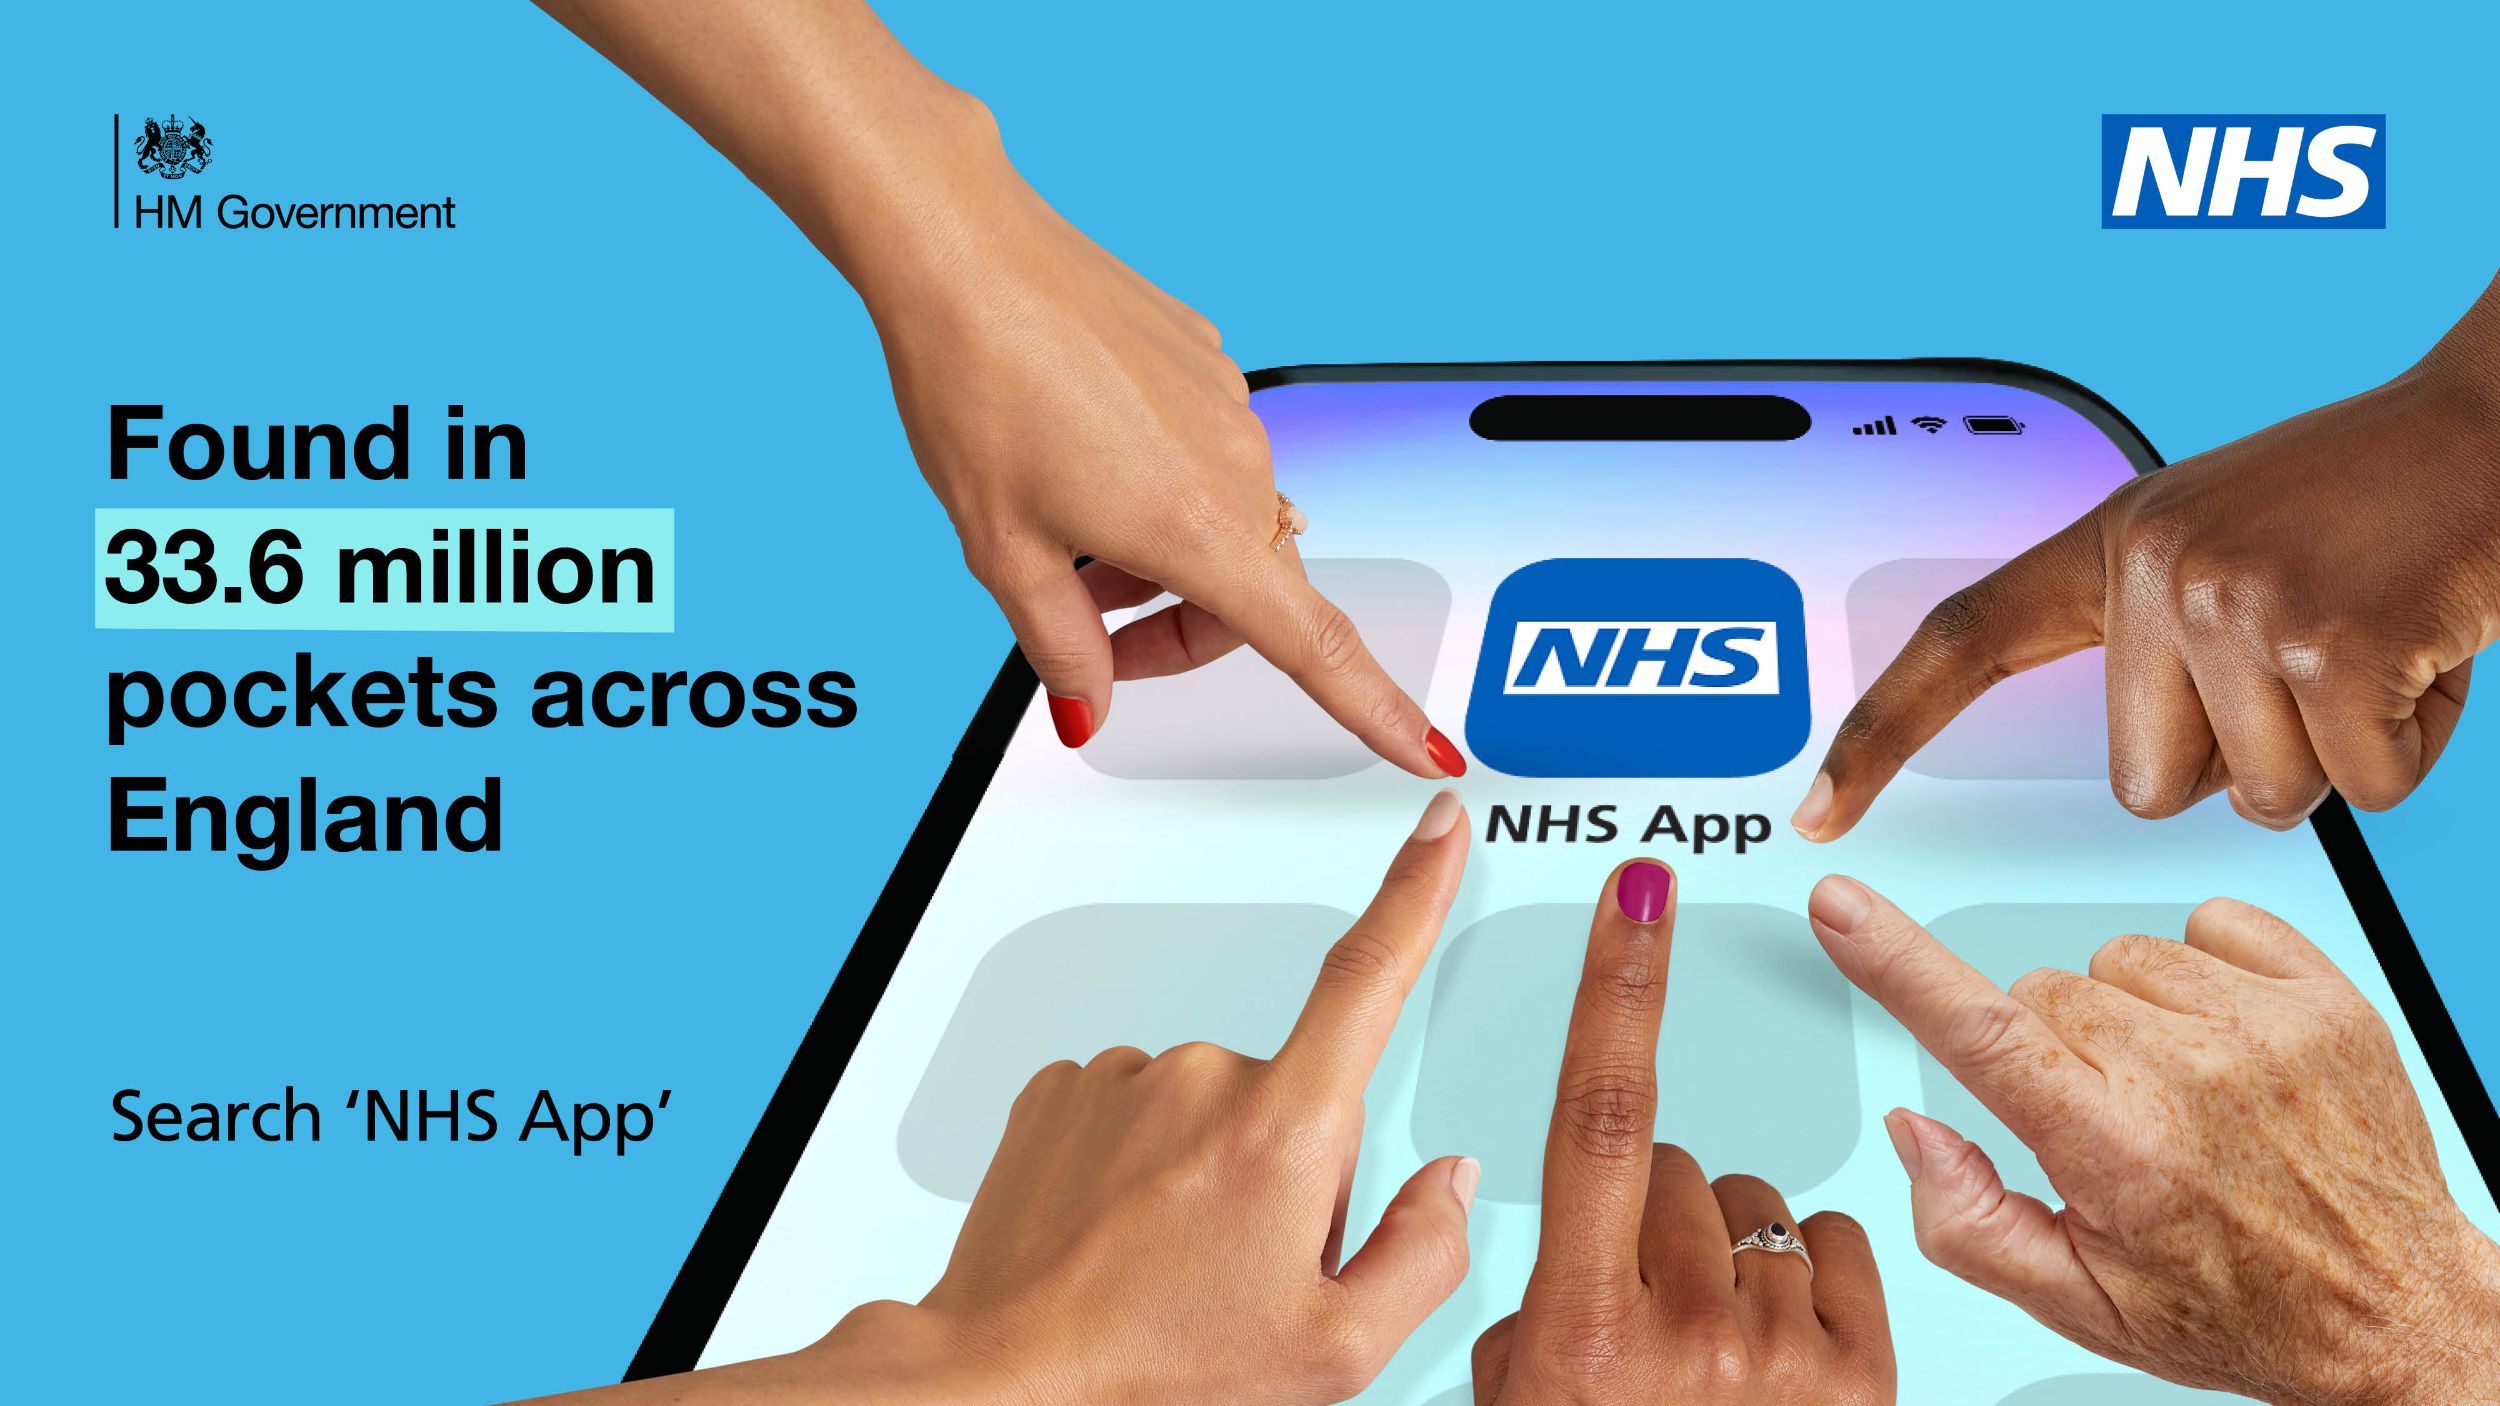 Picture of many hands touching a phone screen with wording advertising the NHS App